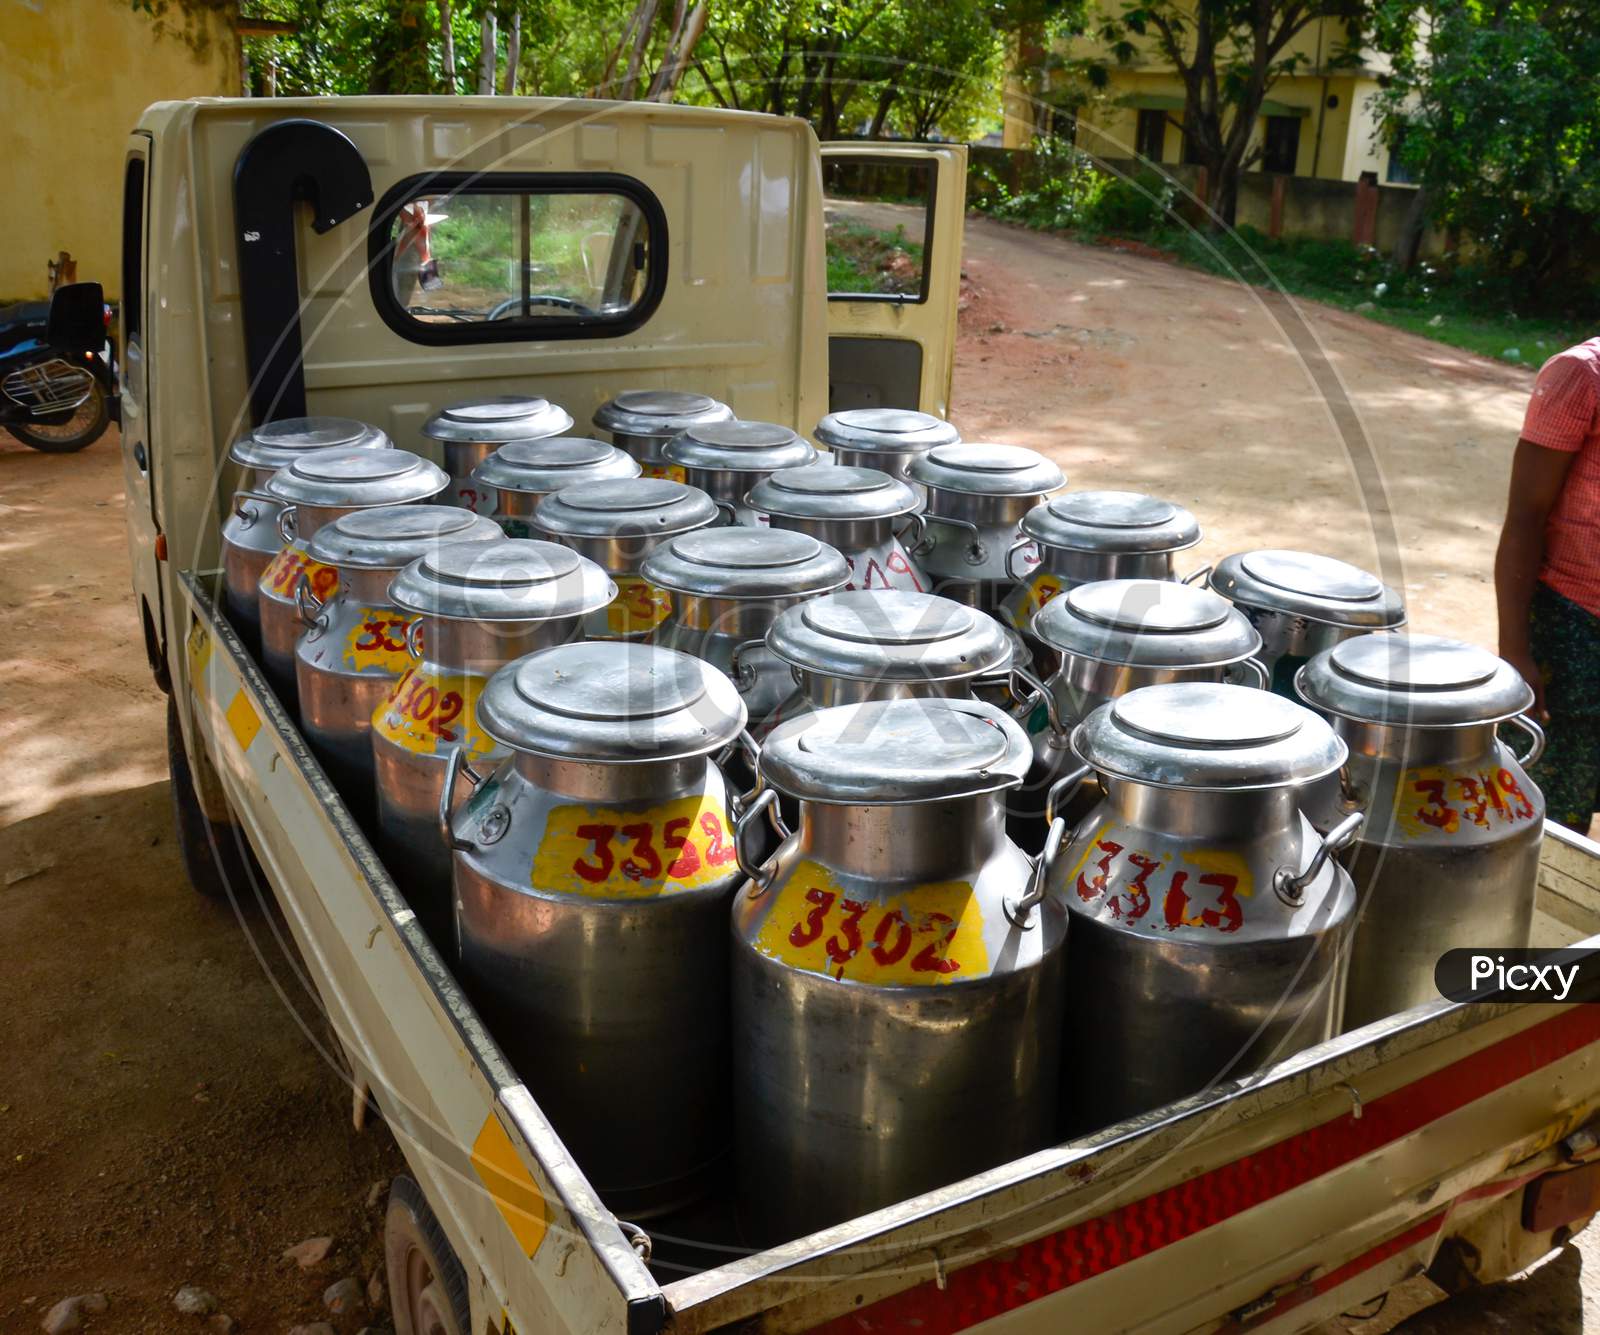 Individually numbered stainless steel milk cans filled with raw milk loaded in a mini truck in India